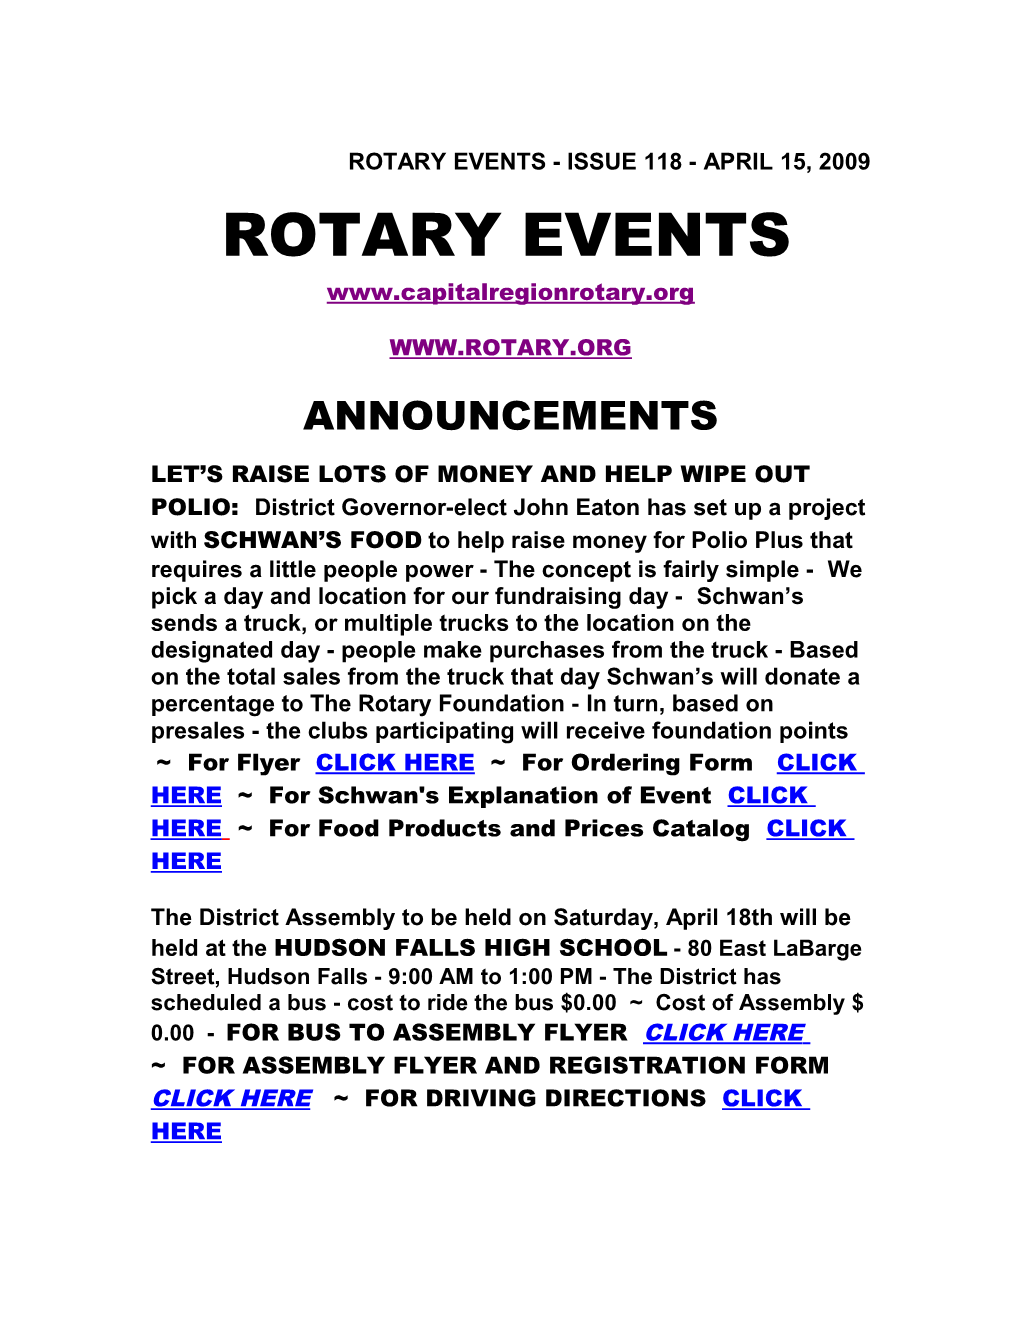 Rotary Events - Issue 118 - April 15, 2009